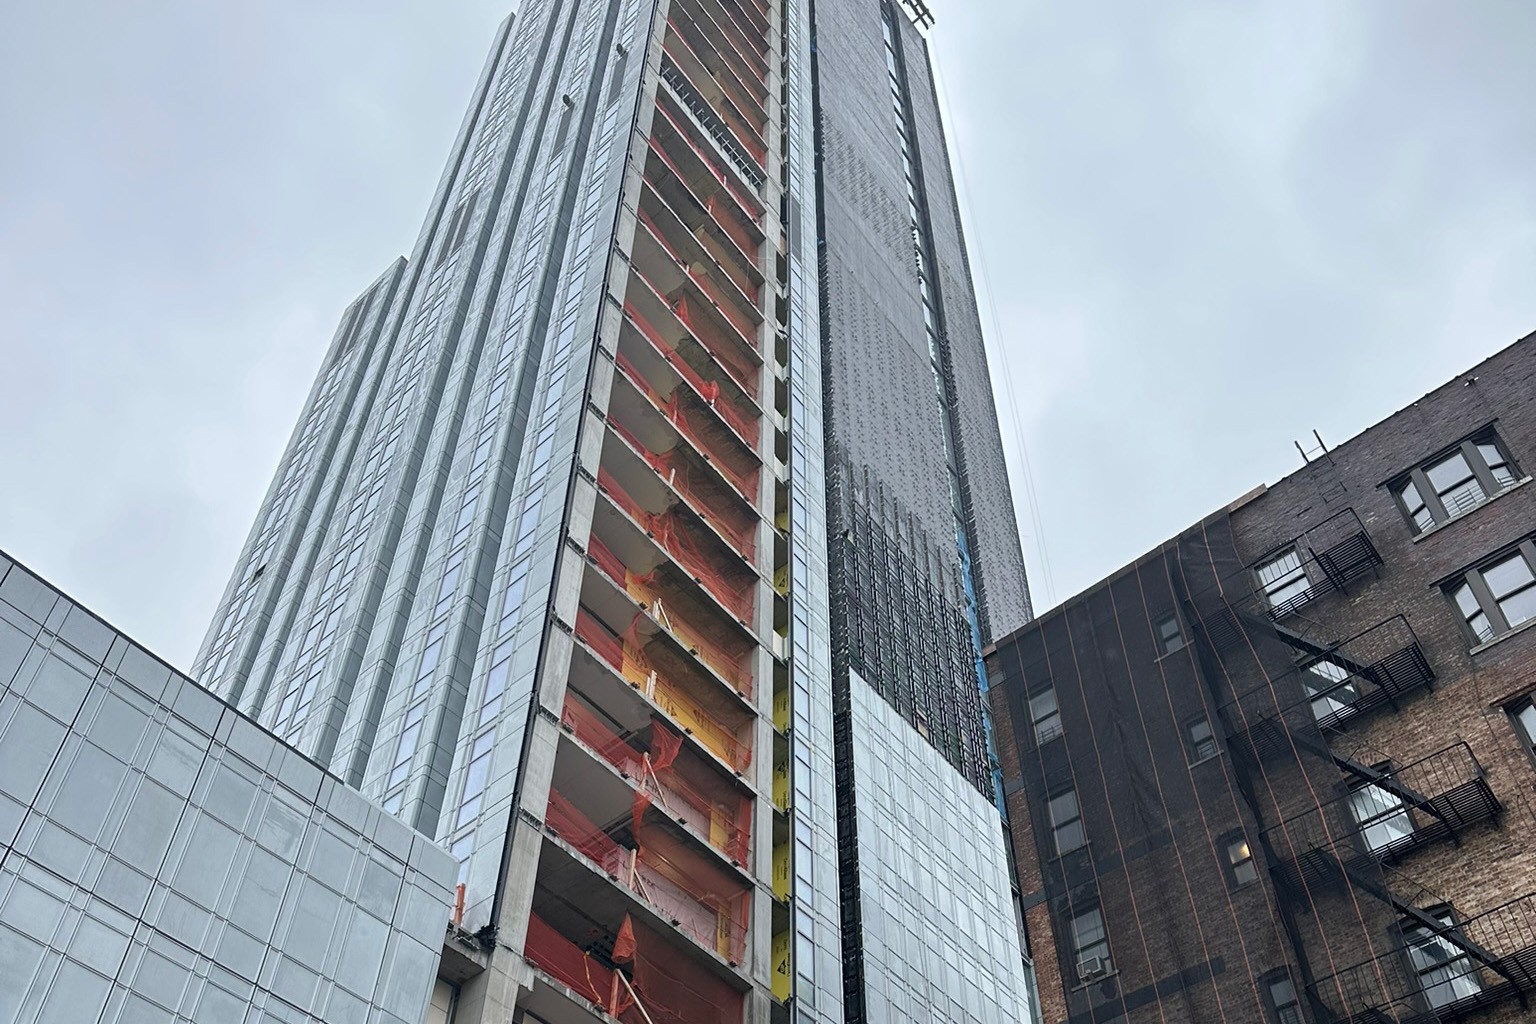 A view of the 600 W. 125th Street from the street level, looking up to the upper floors.  